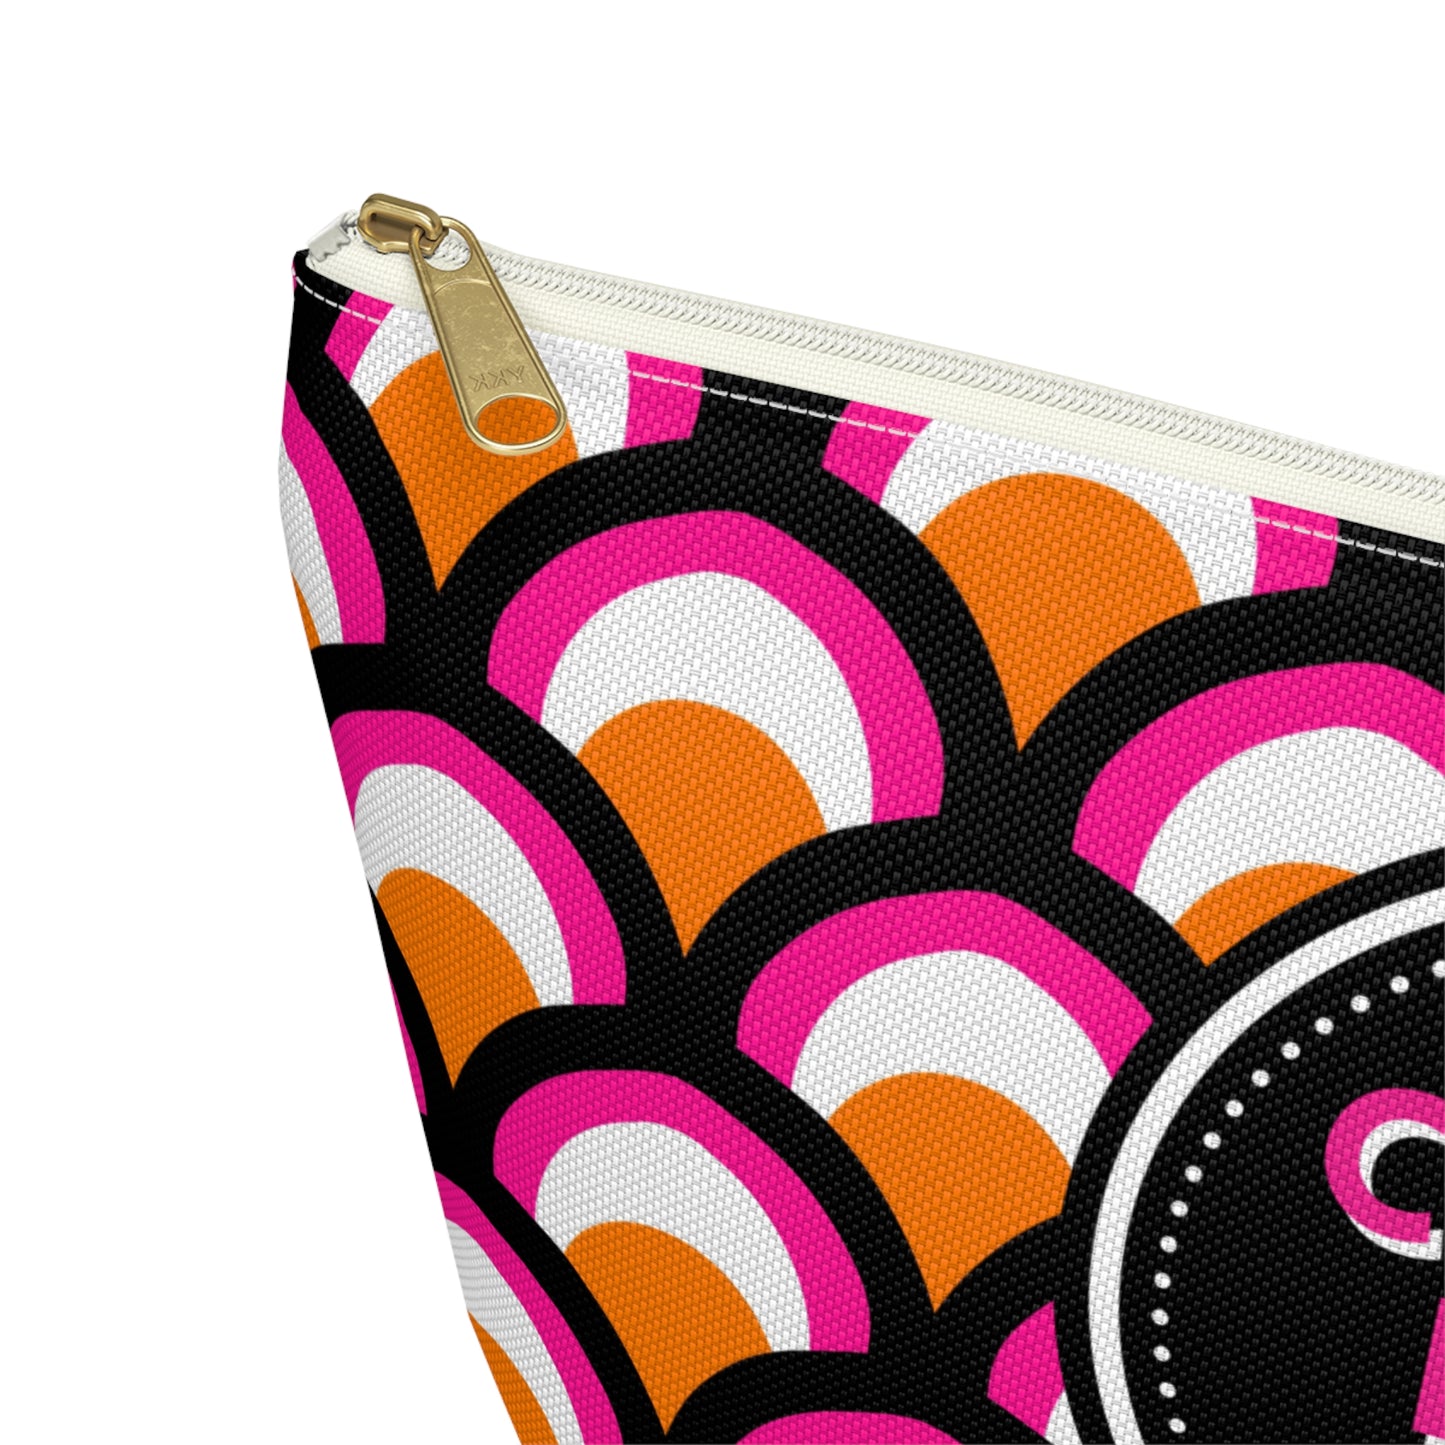 Mahjong Tile & Accessory Bag (T-bottom). Unique Colorful Mahjongg Accessory Pouch Large Enough for Tile Sets. Pink and Orange Pattern.